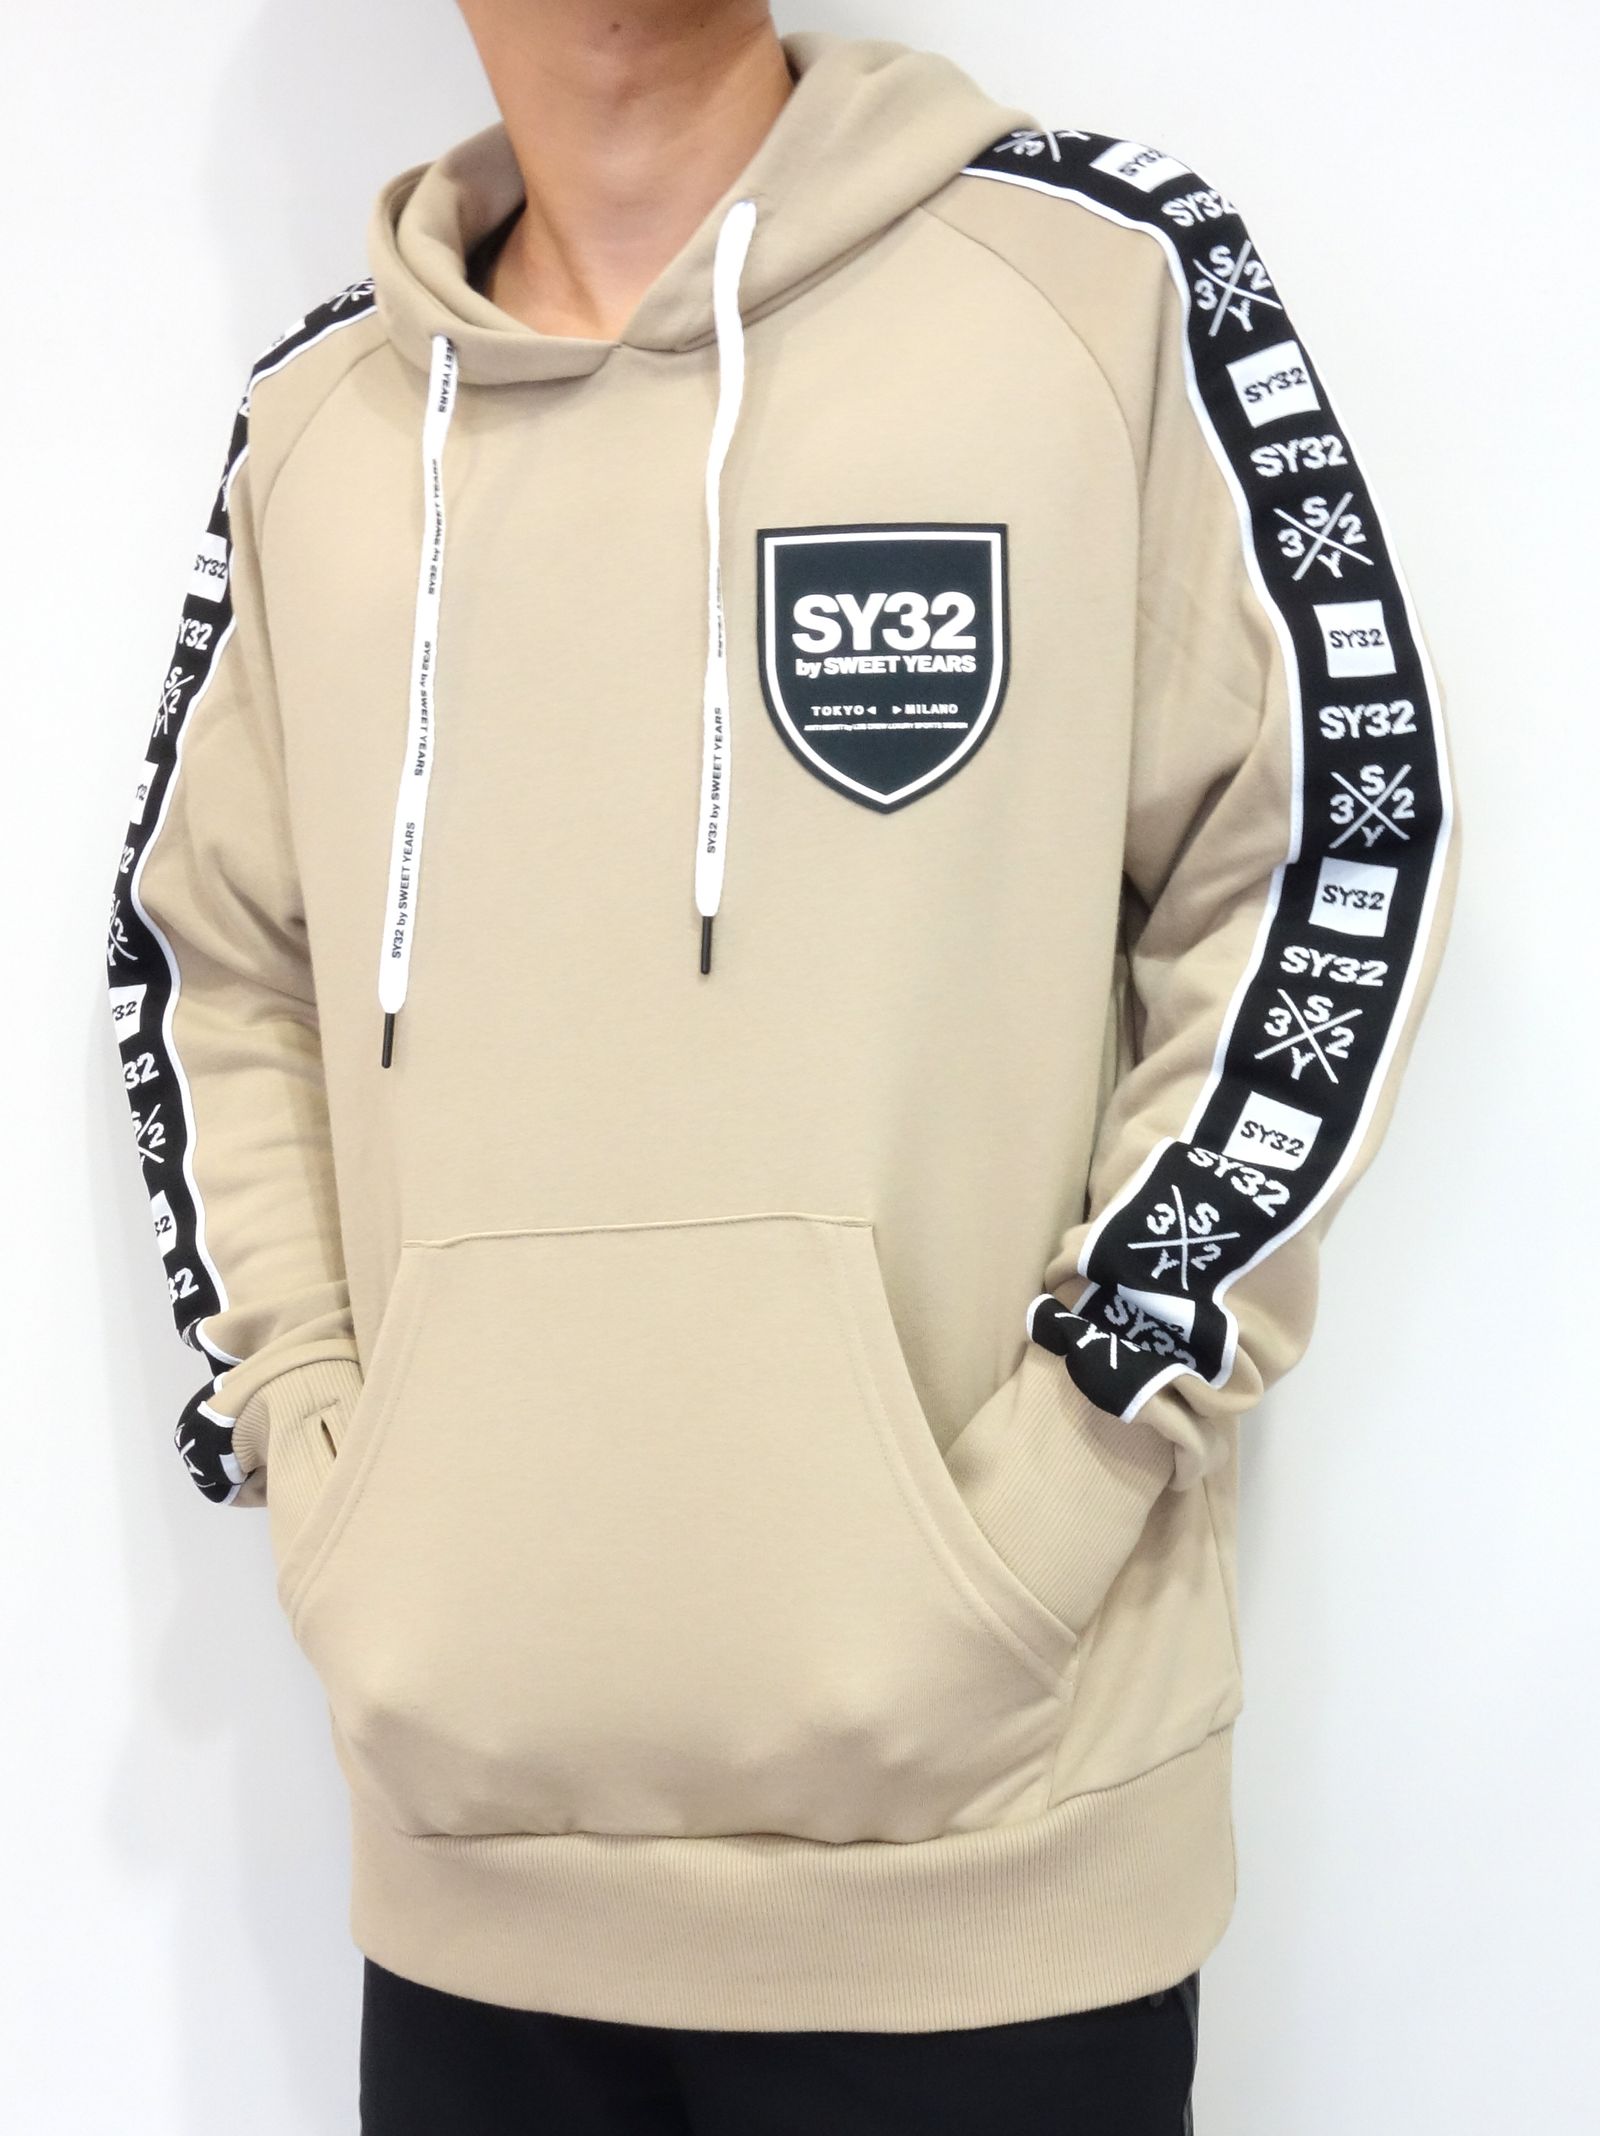 SY32 by SWEET YEARS - LINE TAPE P/O HOODIE / TNS1747 / プル